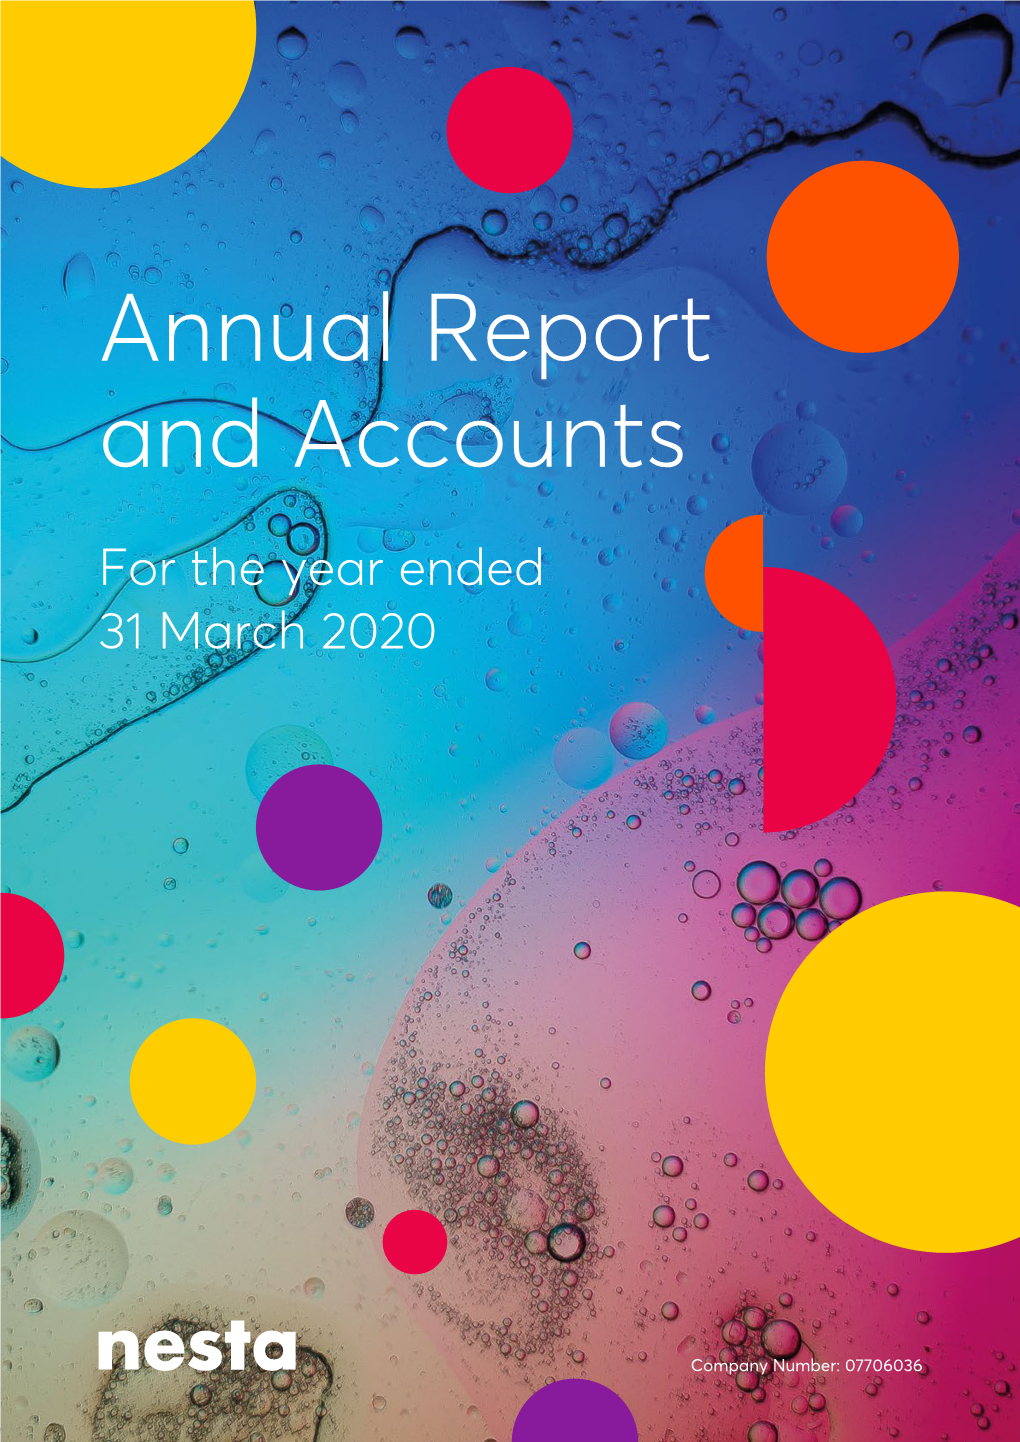 Annual Report and Accounts for the Year Ended 31 March 2020